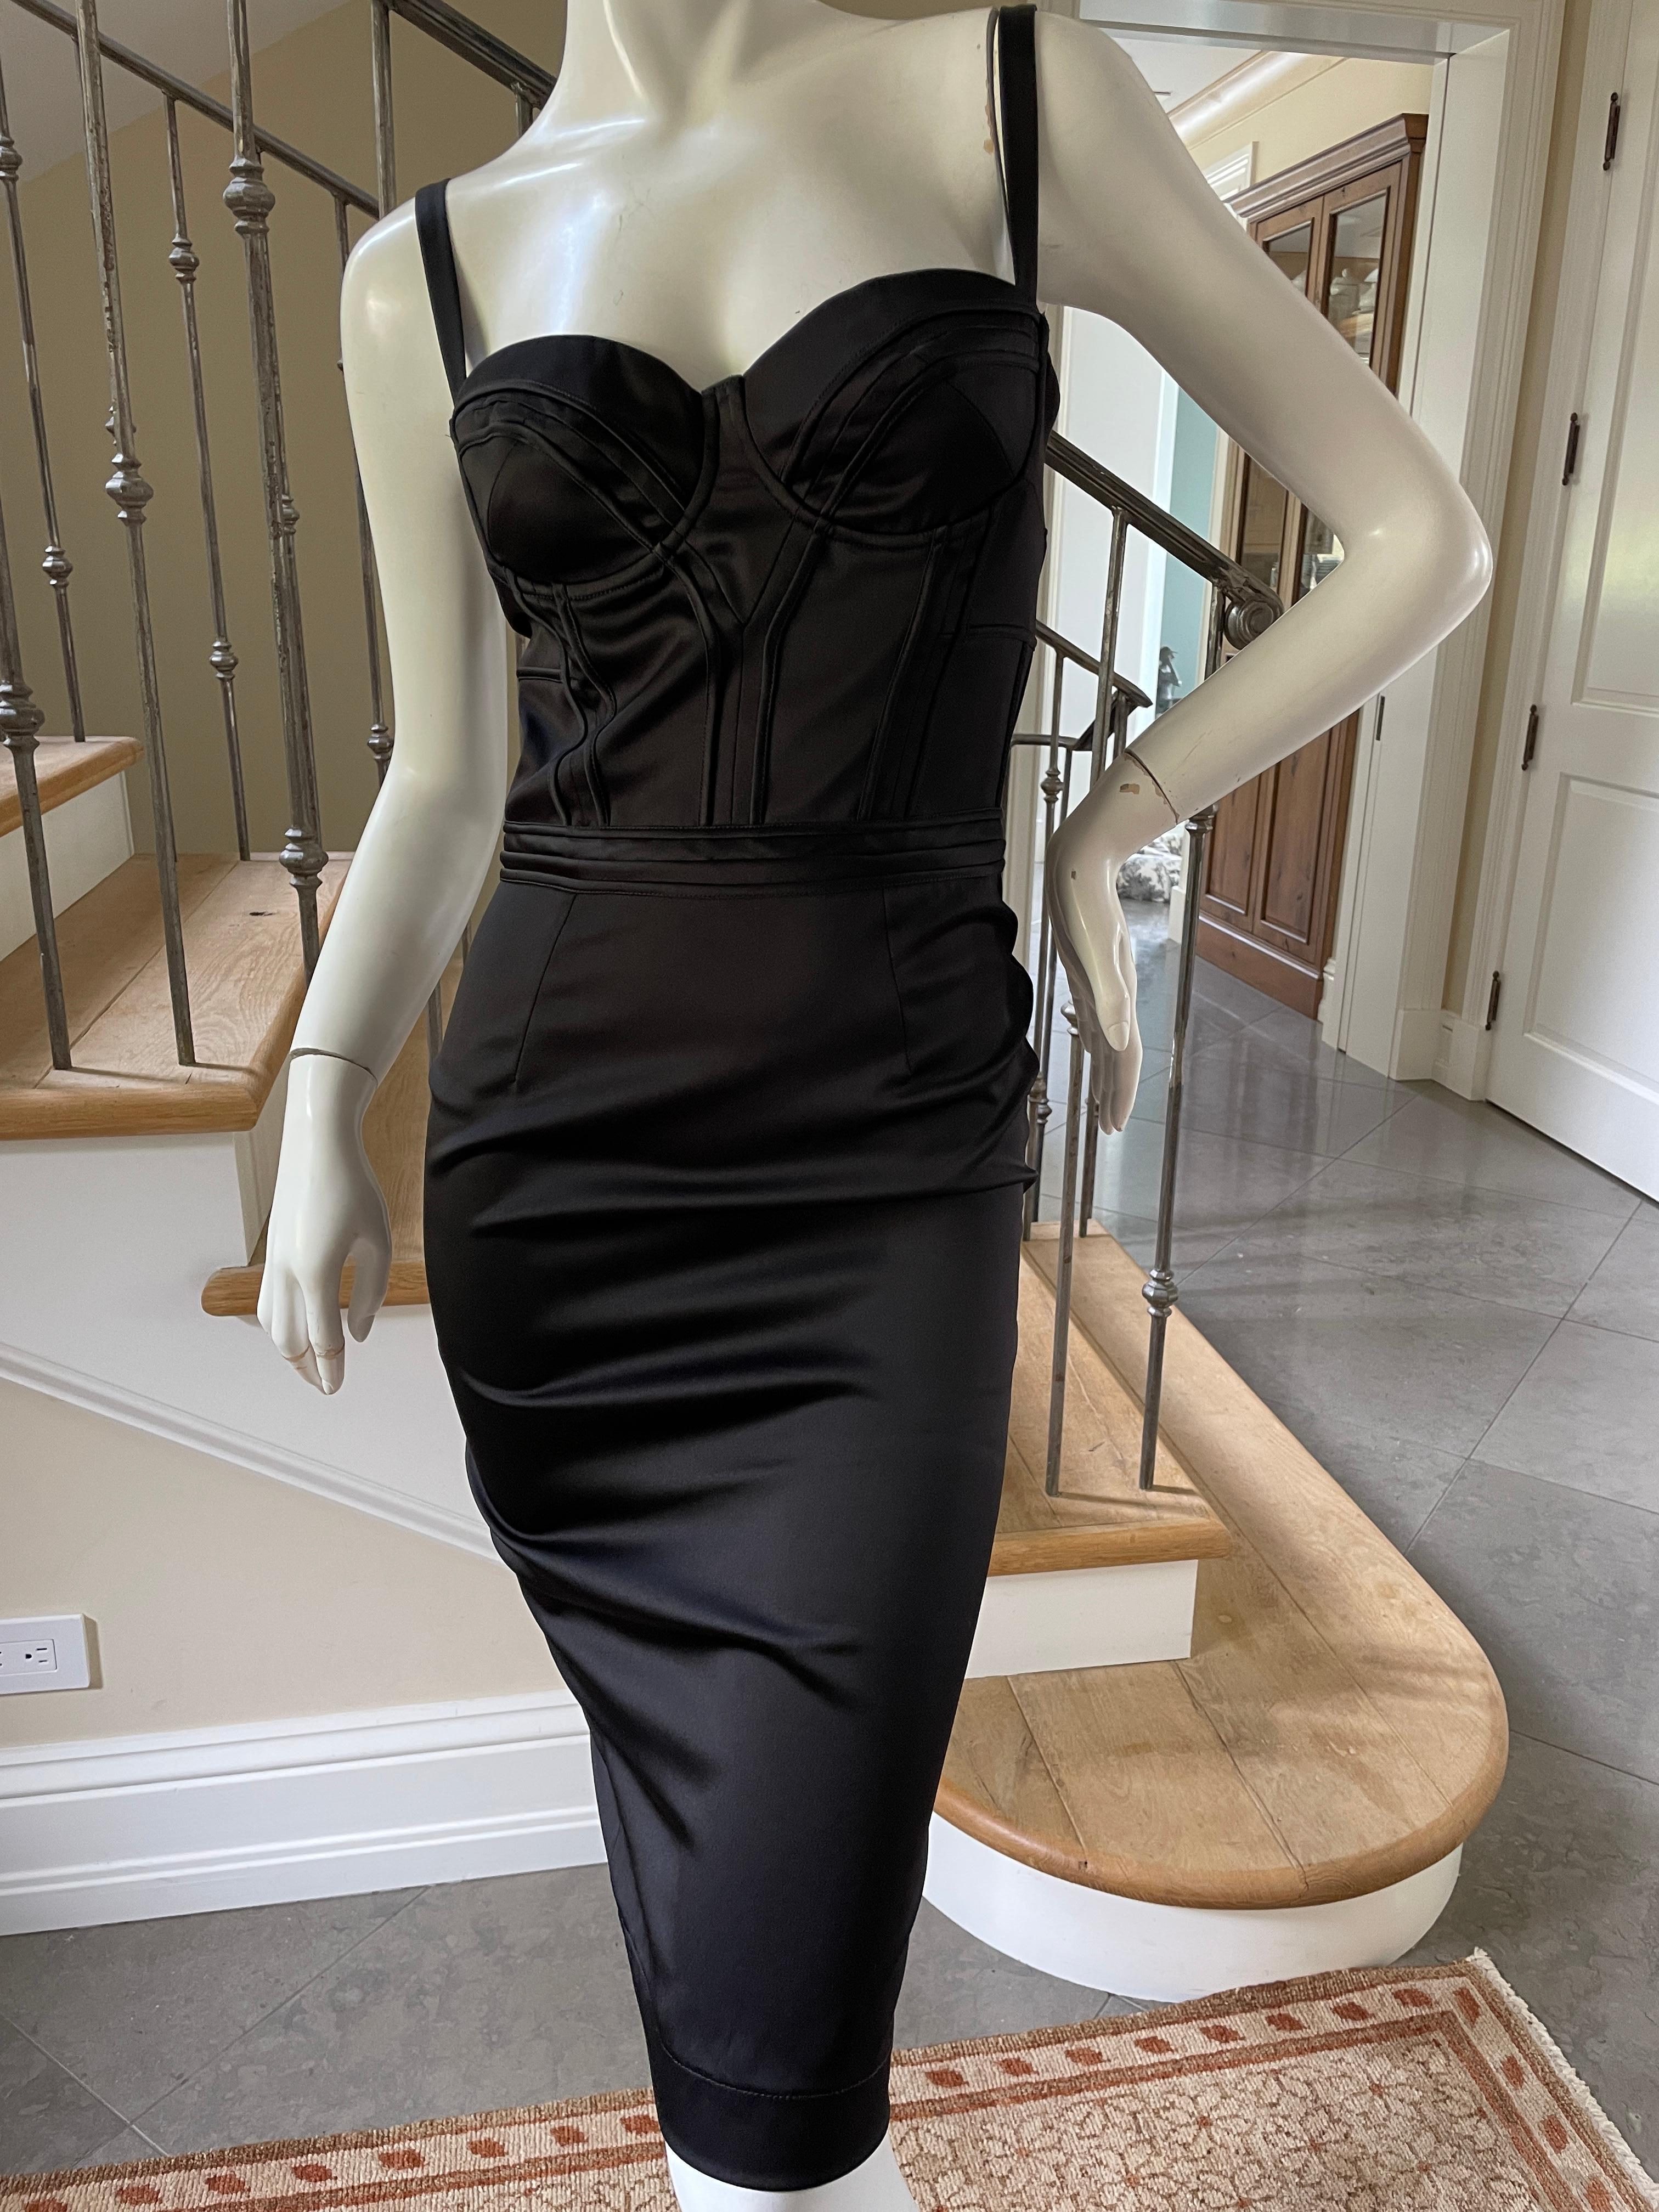 Just Cavalli Sexy Black Corset Cocktail Dress by Roberto Cavalli.
New with Neiman Marcus tags, this retailed for $565
 Sz 40
 Bust 32